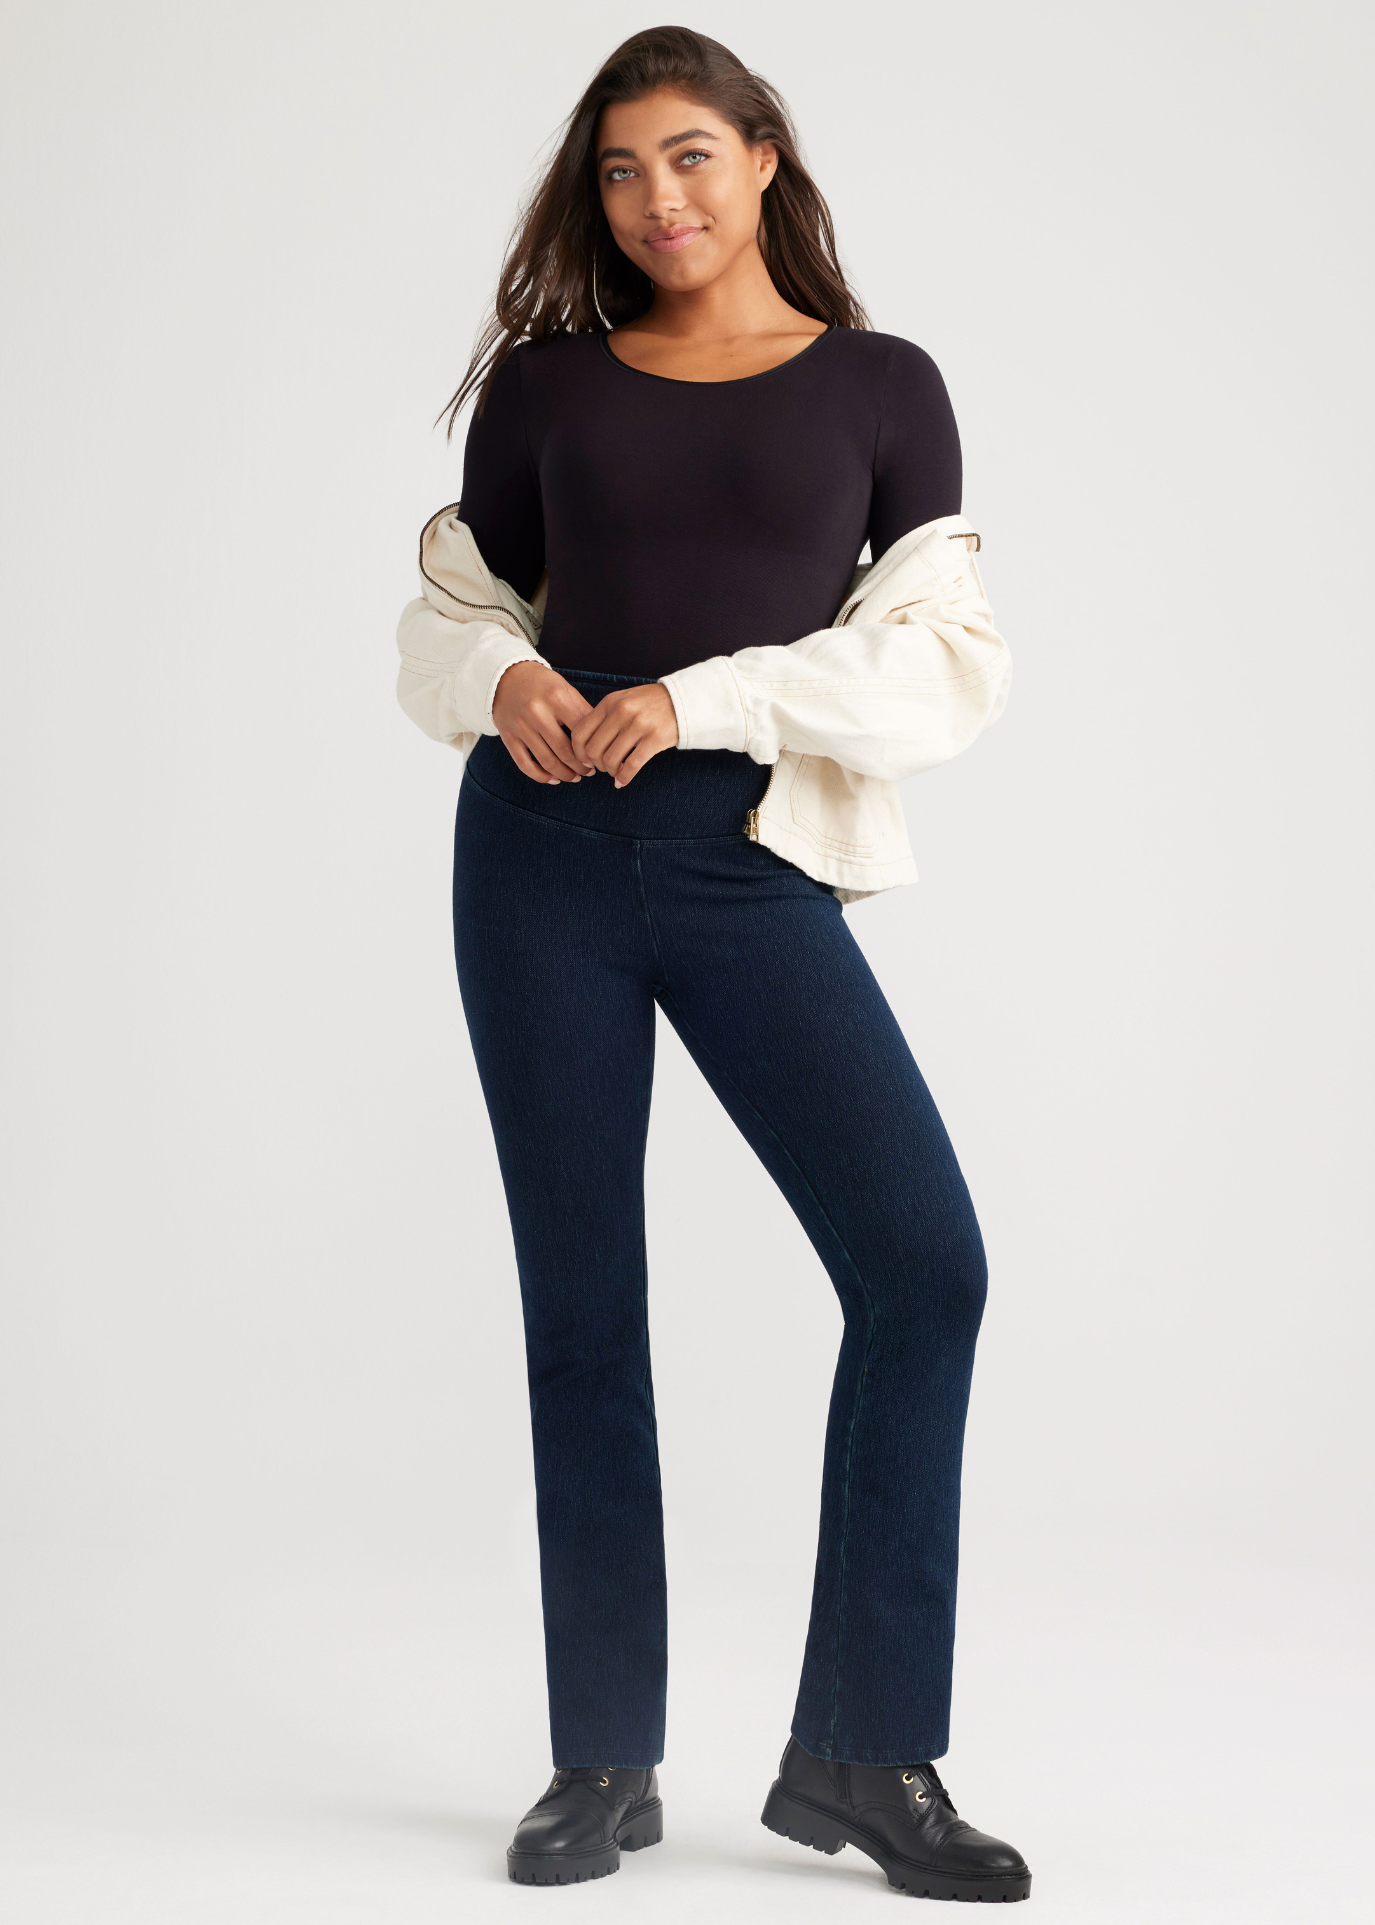 long sleeve shaping thong bodysuit - outlast® seamless in Black , denim bootcut shaping legging in True Indigo and a zip up in Ivory worn by a woman standing facing forward with arms at waist Yummie